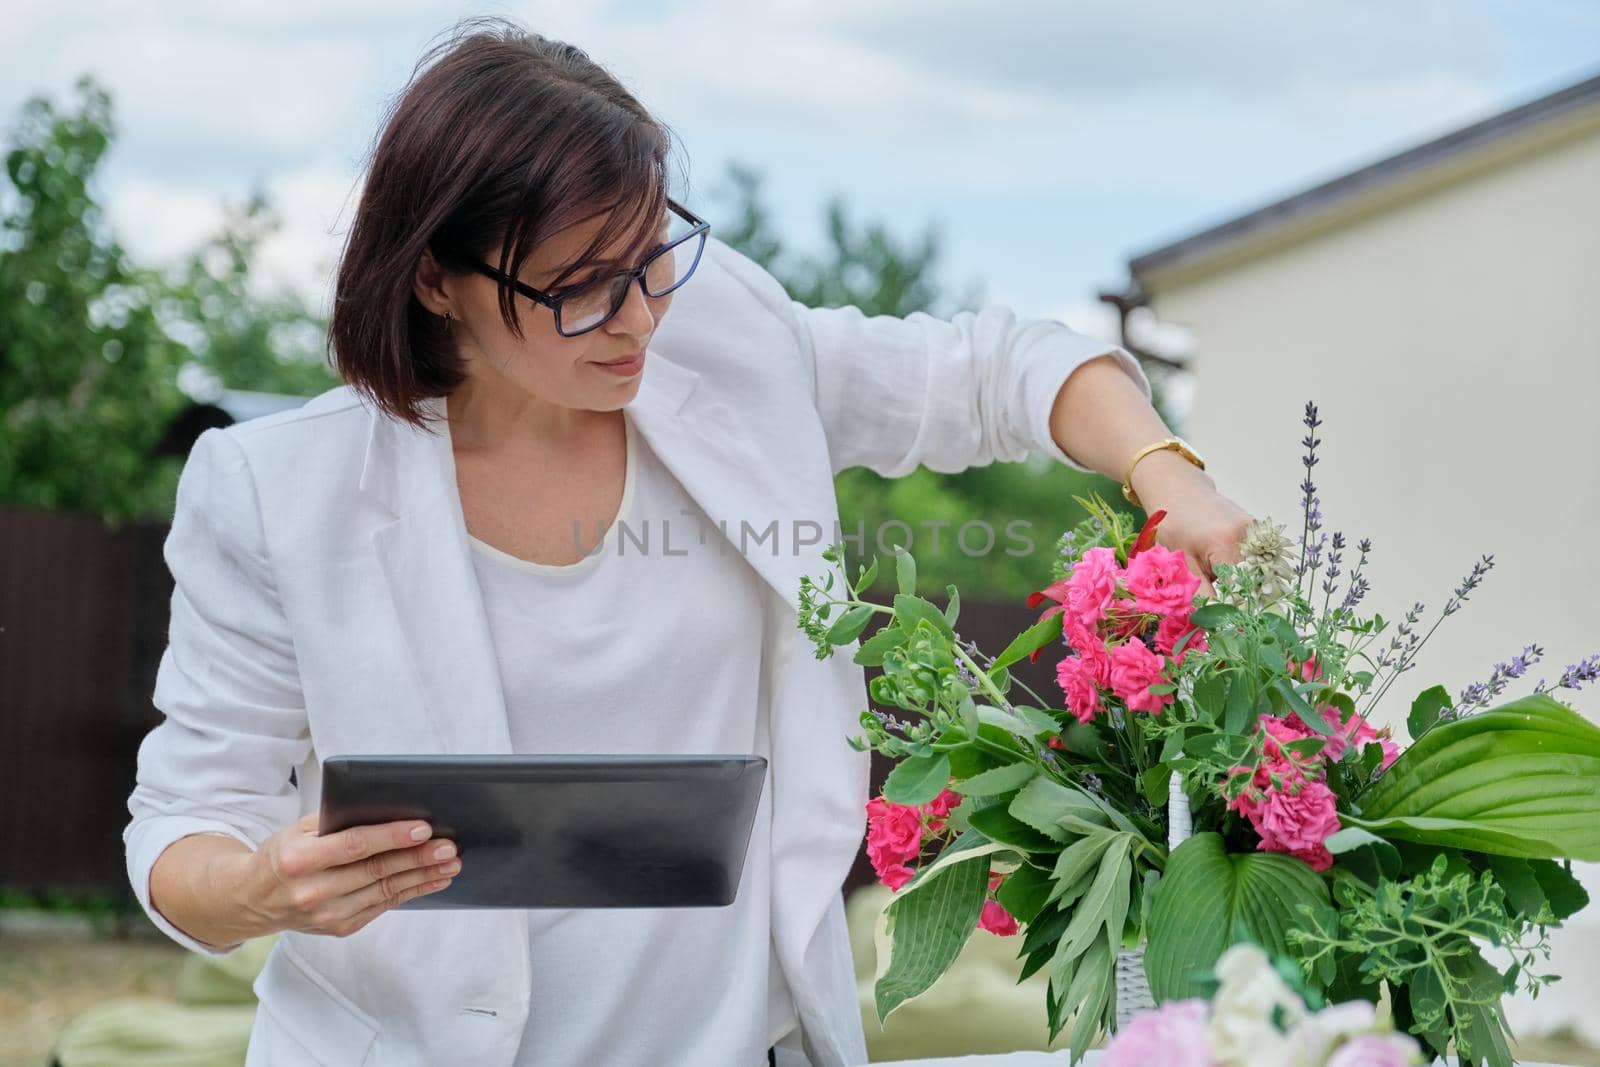 Organization of weddings, parties, event decoration. Business woman professional decorator florist with digital tablet working outdoors decorating ceremony. Female with flower arrangement